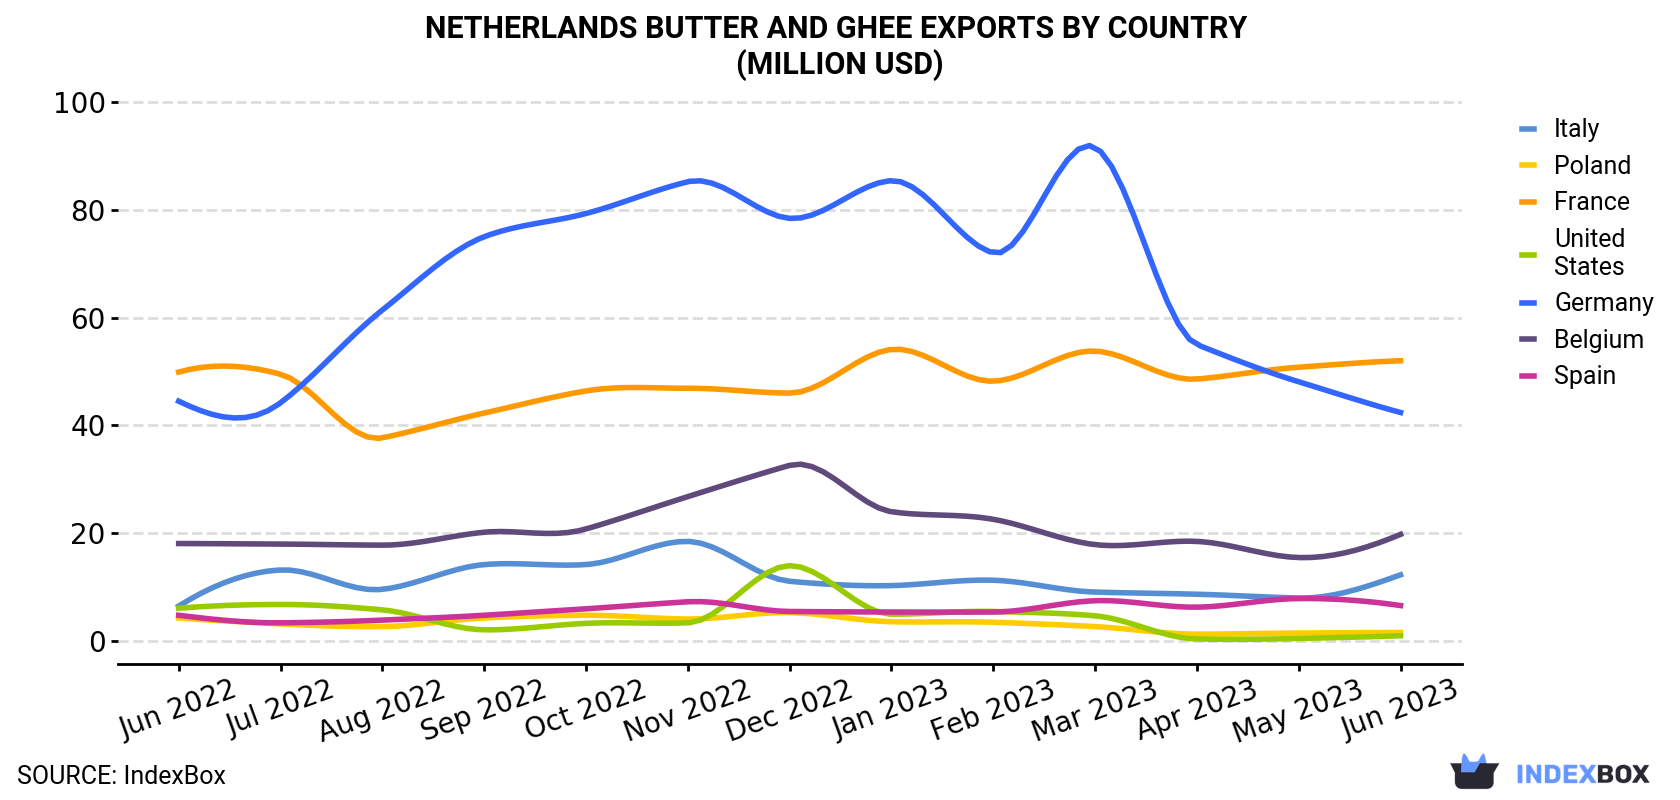 Netherlands Butter And Ghee Exports By Country (Million USD)